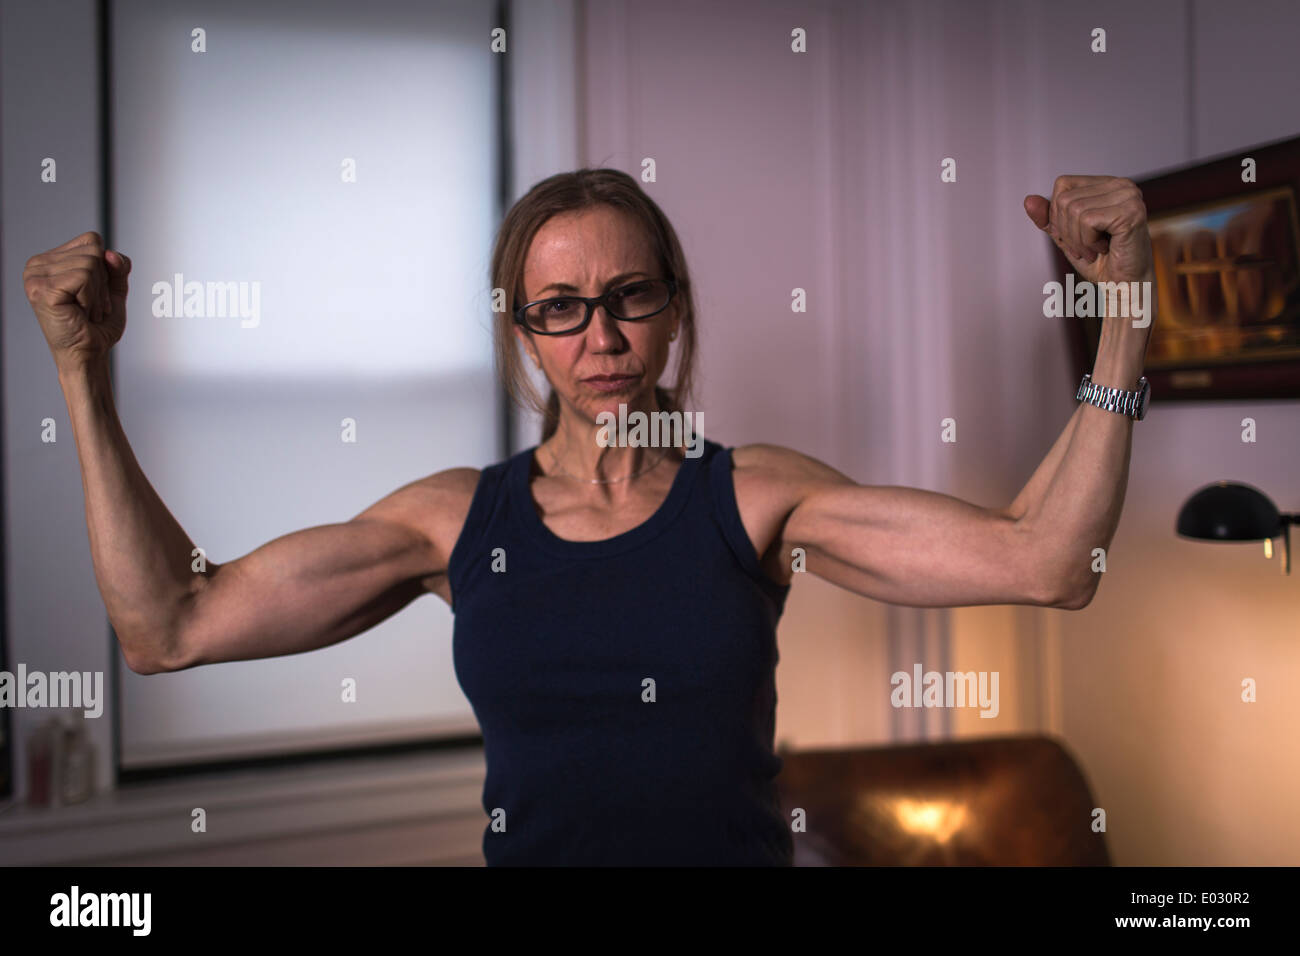 19,227 Toned Arms Woman Images, Stock Photos, 3D objects